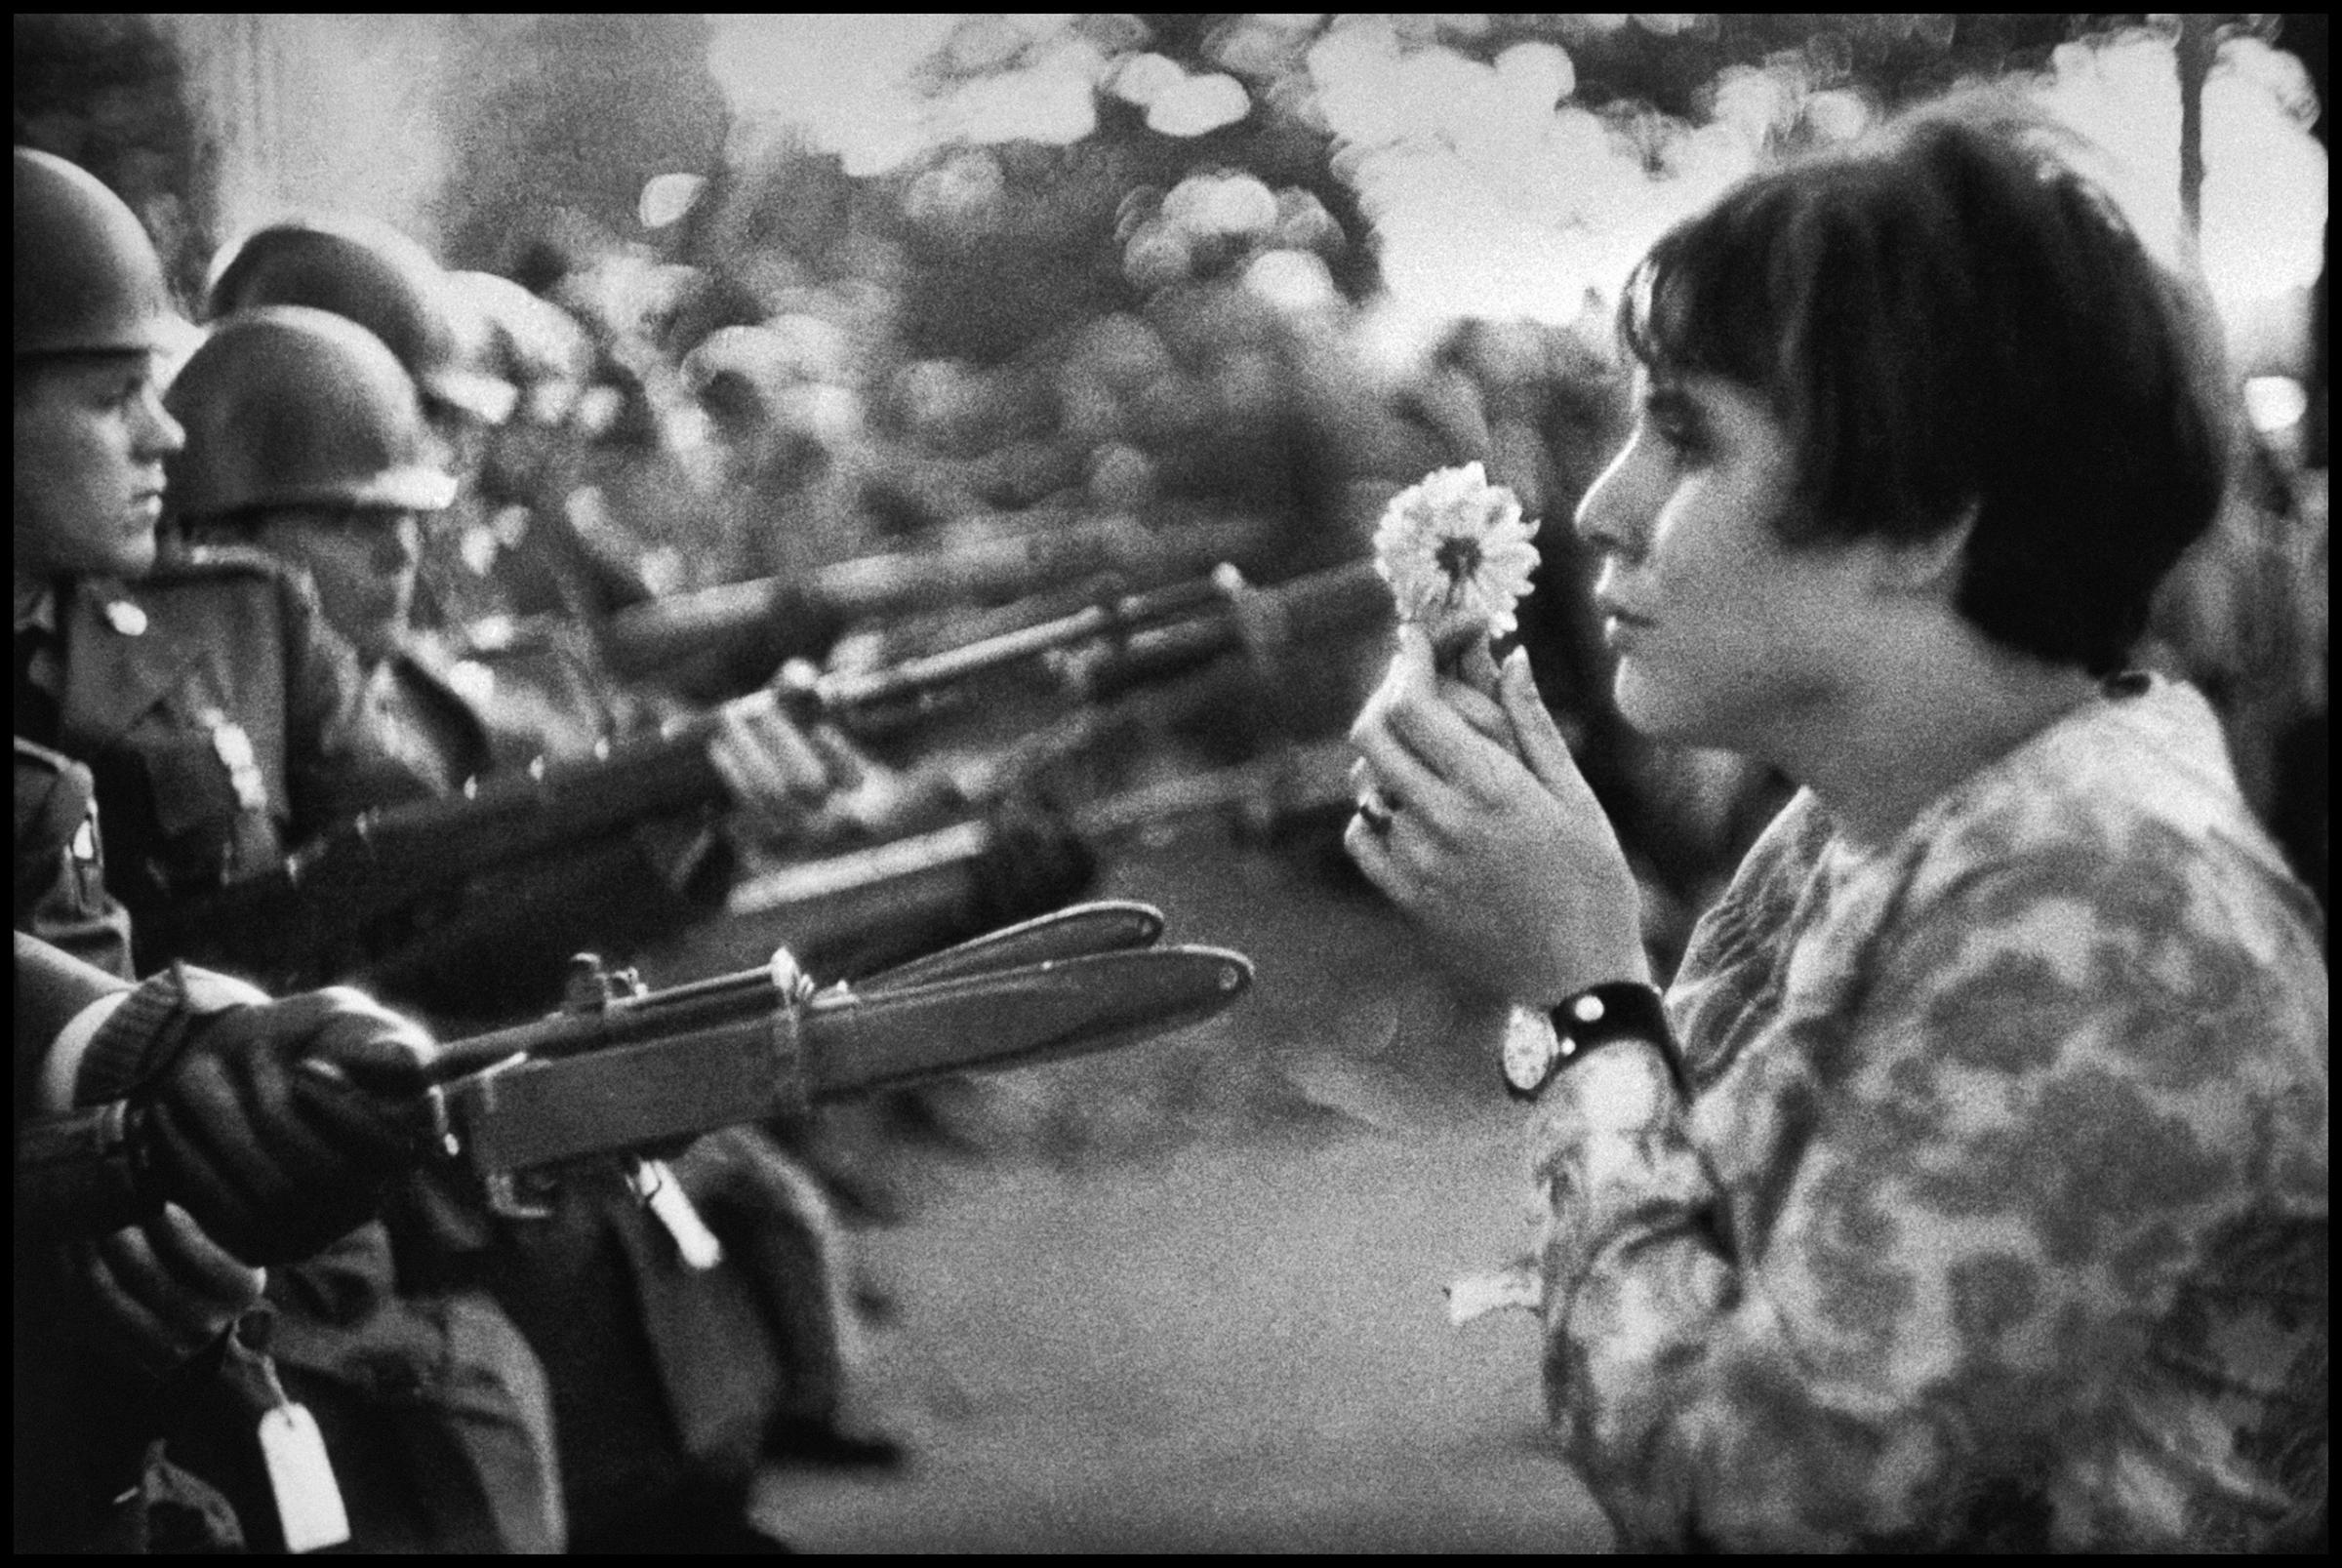 Protestor Jan Rose Kasmir confronts National Guard in 1967 in iconic photo by Marc Riboud